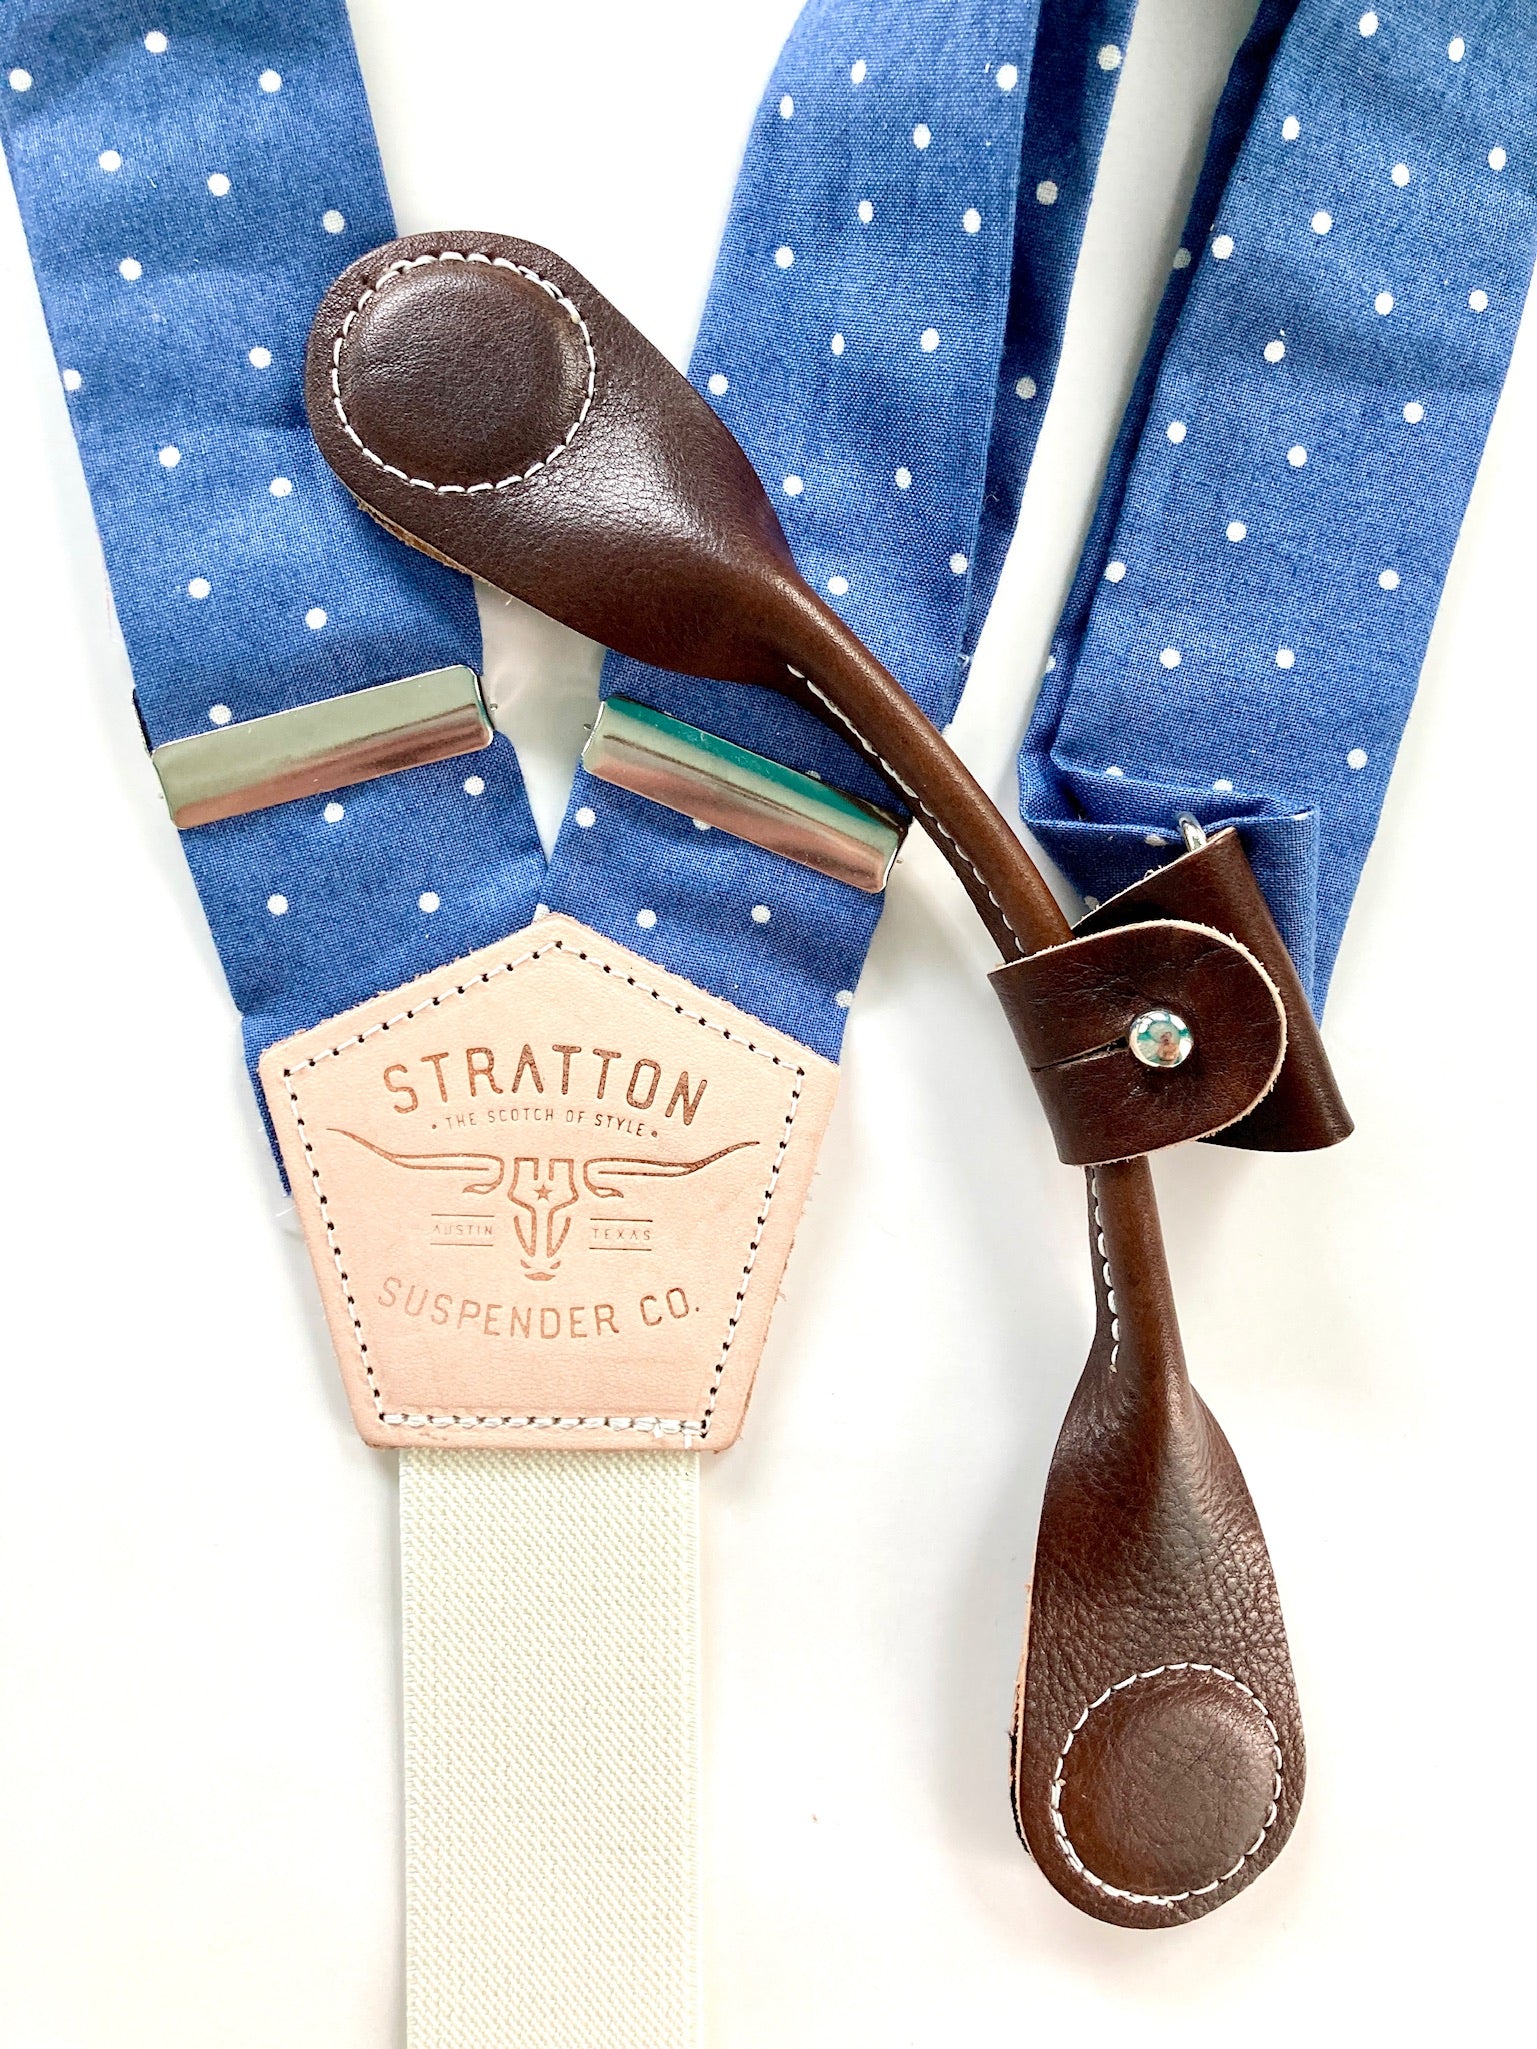 Stratton Suspenders in Vintage Polka Dot Blue Paired with Chocolate Pontedero Leather Magnetic Clasps